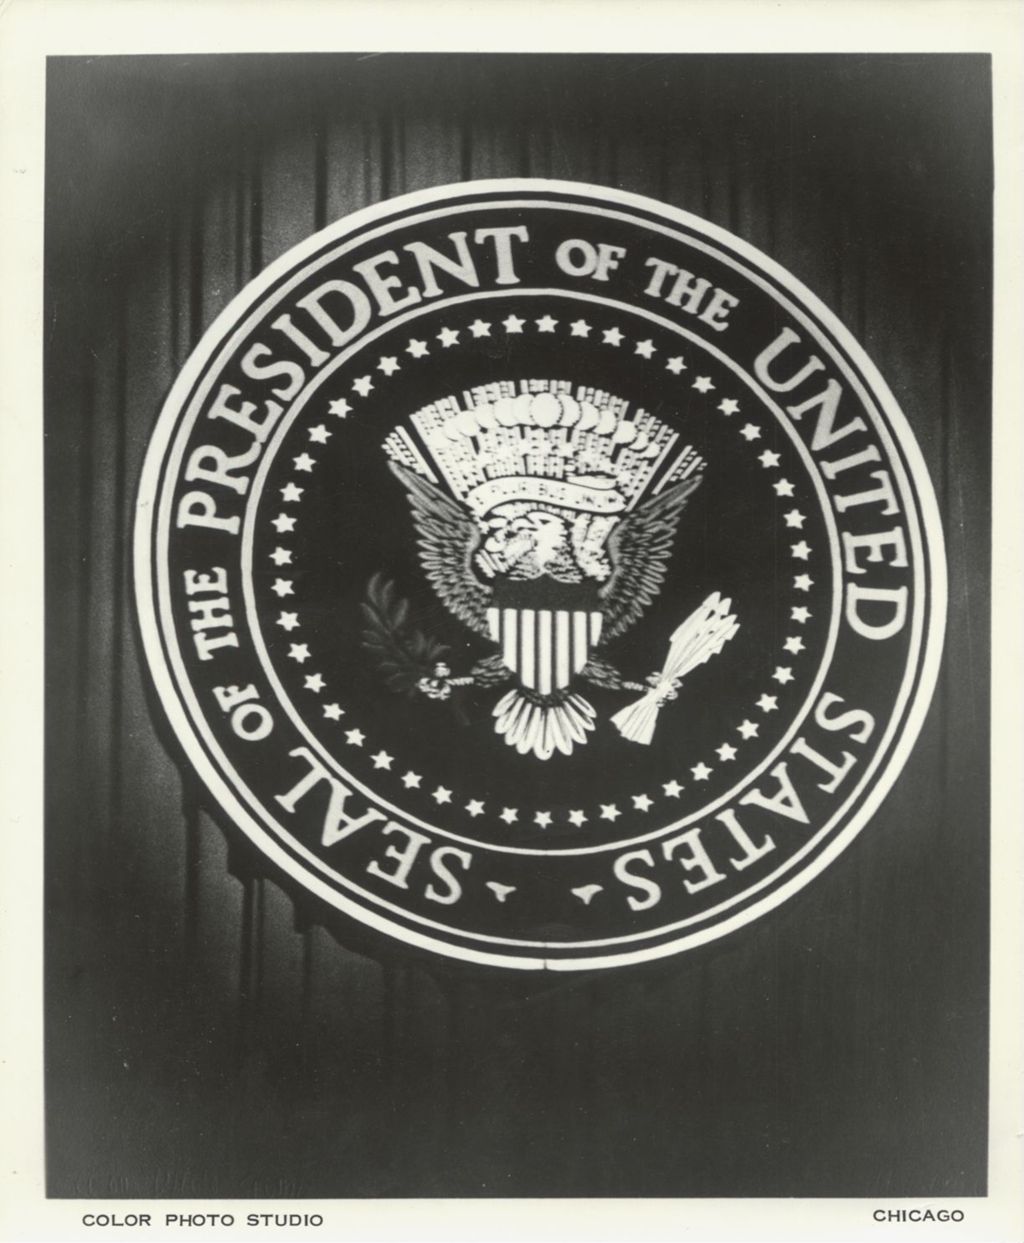 Miniature of Seal of the President of the United States